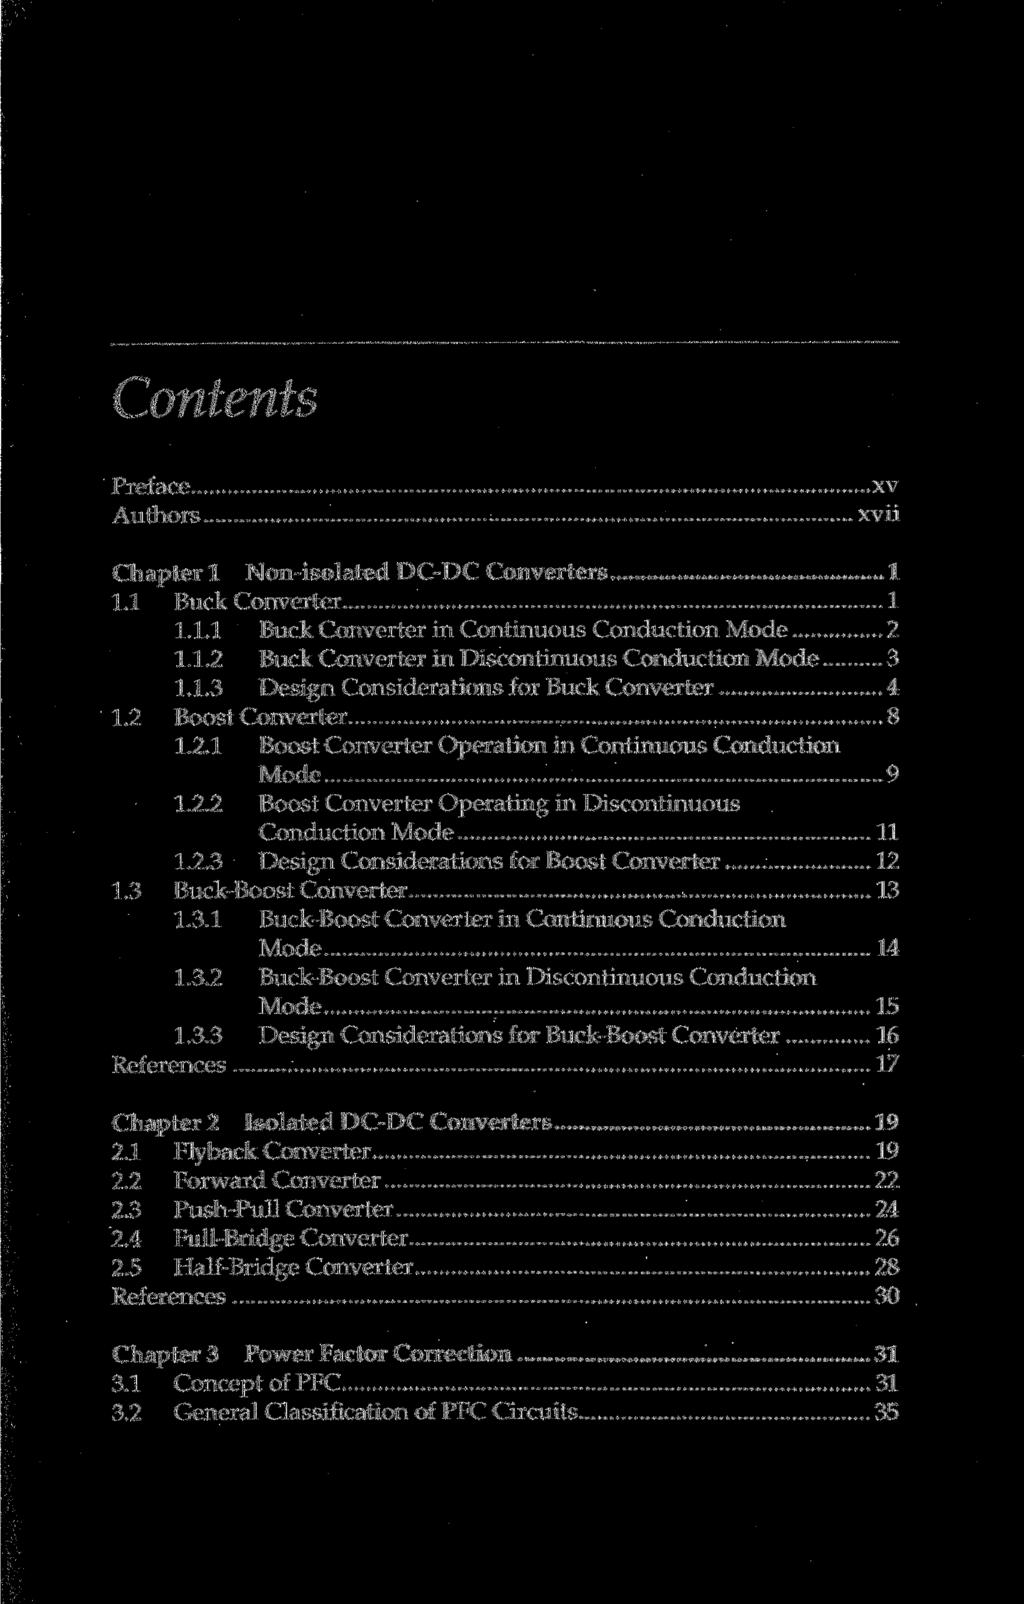 Contents Preface Authors xv xvii Chapter 1 Non-isolated DC-DC Converters 1 1.1 Buck Converter 1 1.1.1 Buck Converter in Continuous Conduction Mode 2 1.1.2 Buck Converter in Discontinuous Conduction Mode 3 1.